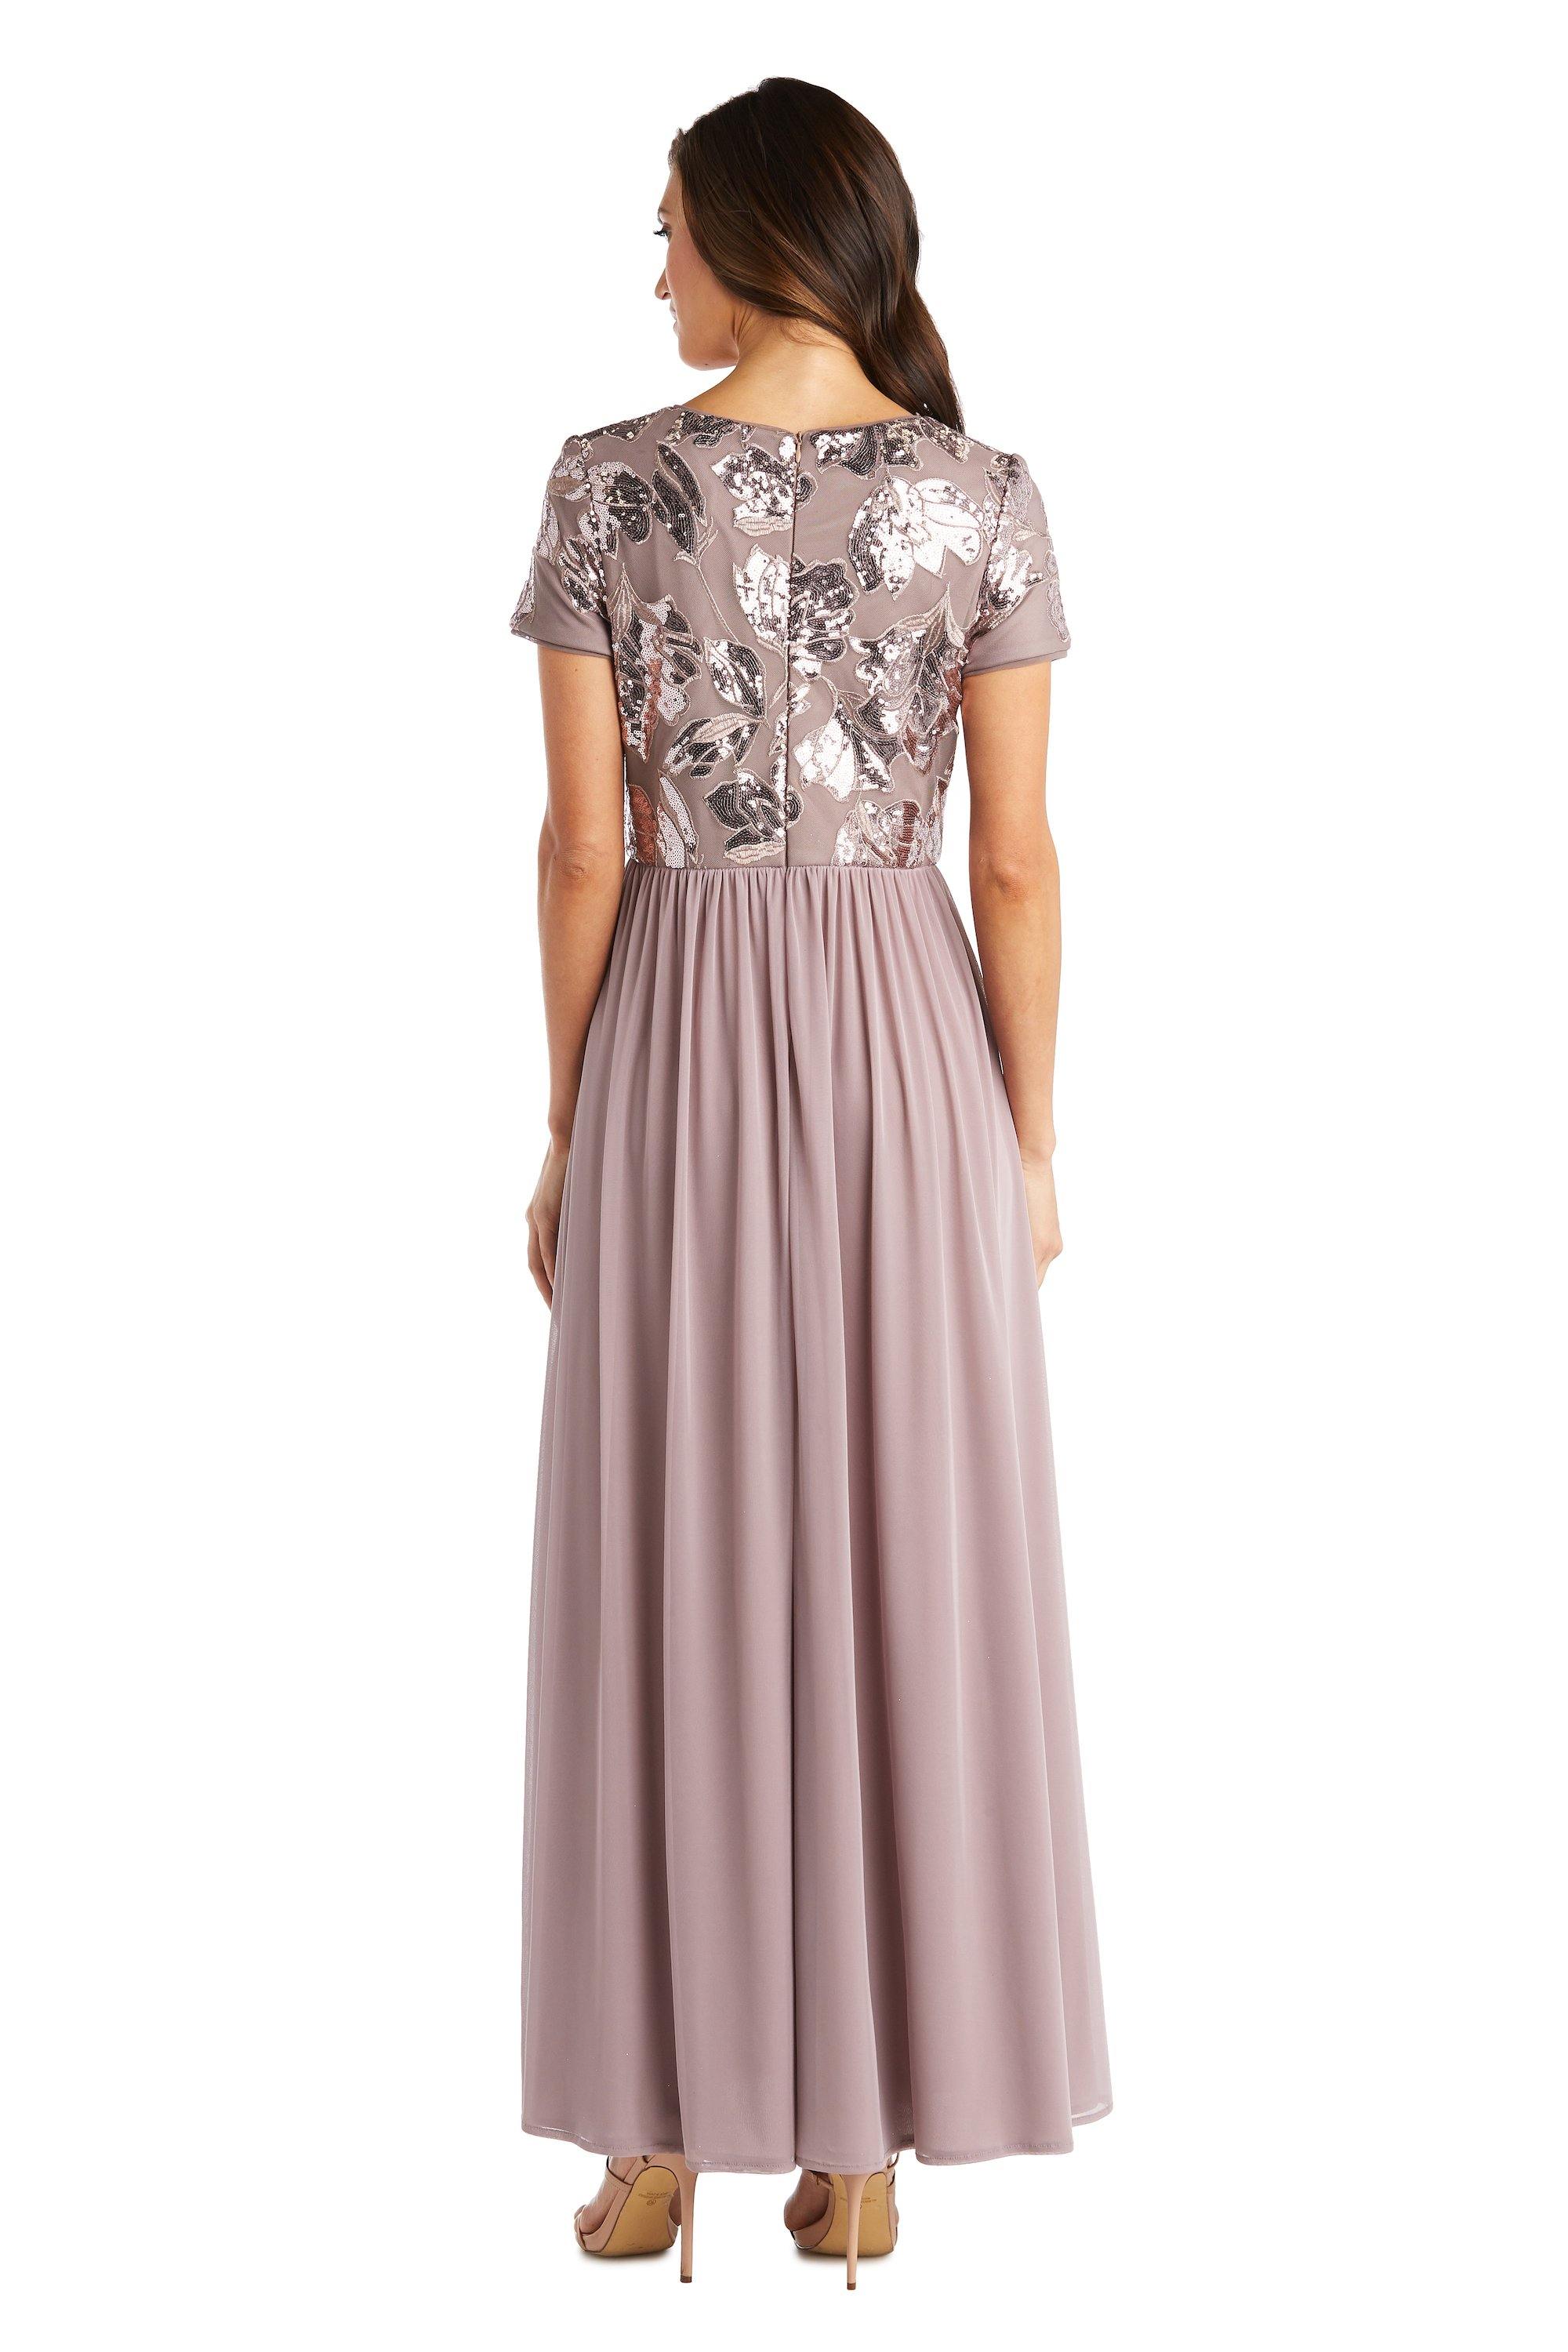 R&M Richards Mother of the Bride Long Dress Sale - The Dress Outlet